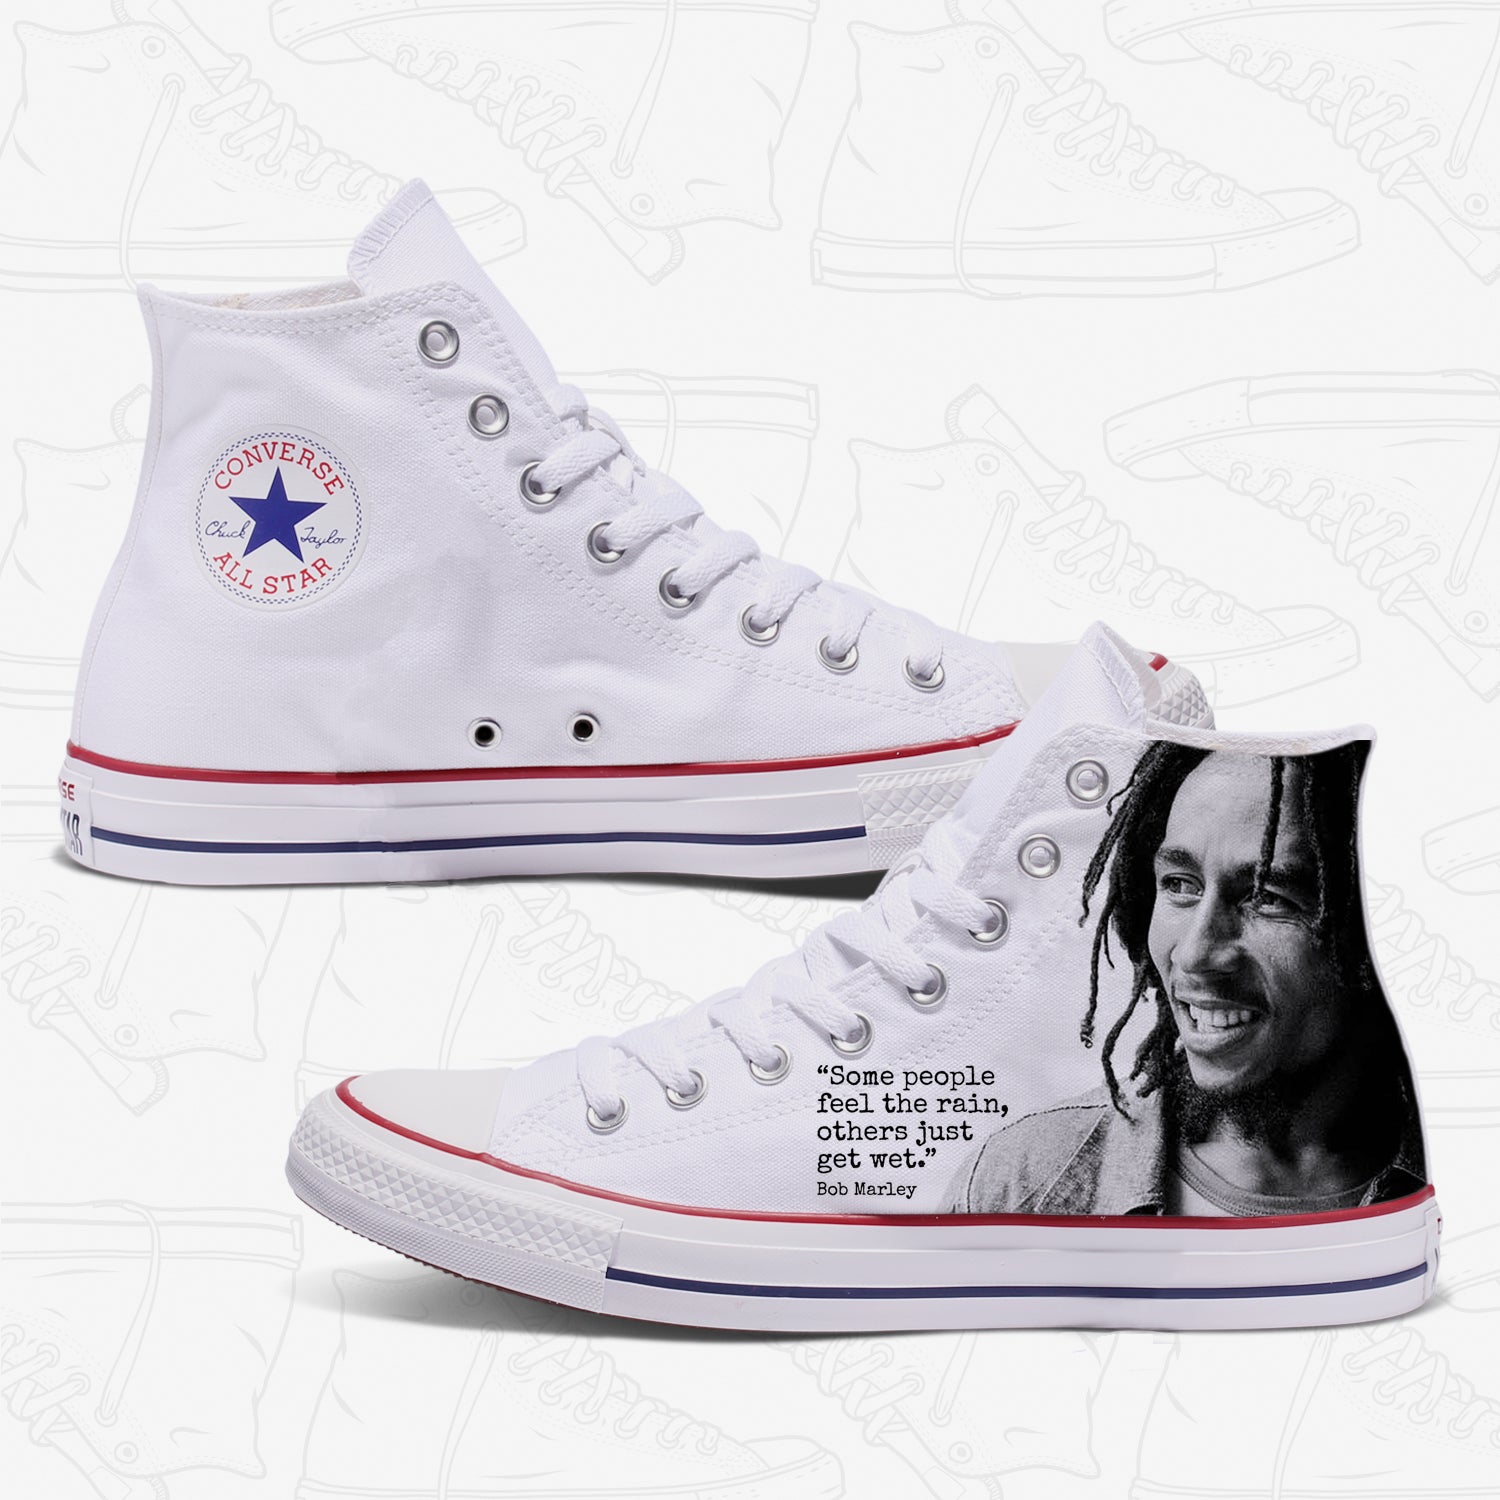 bob marley converse shoes for sale